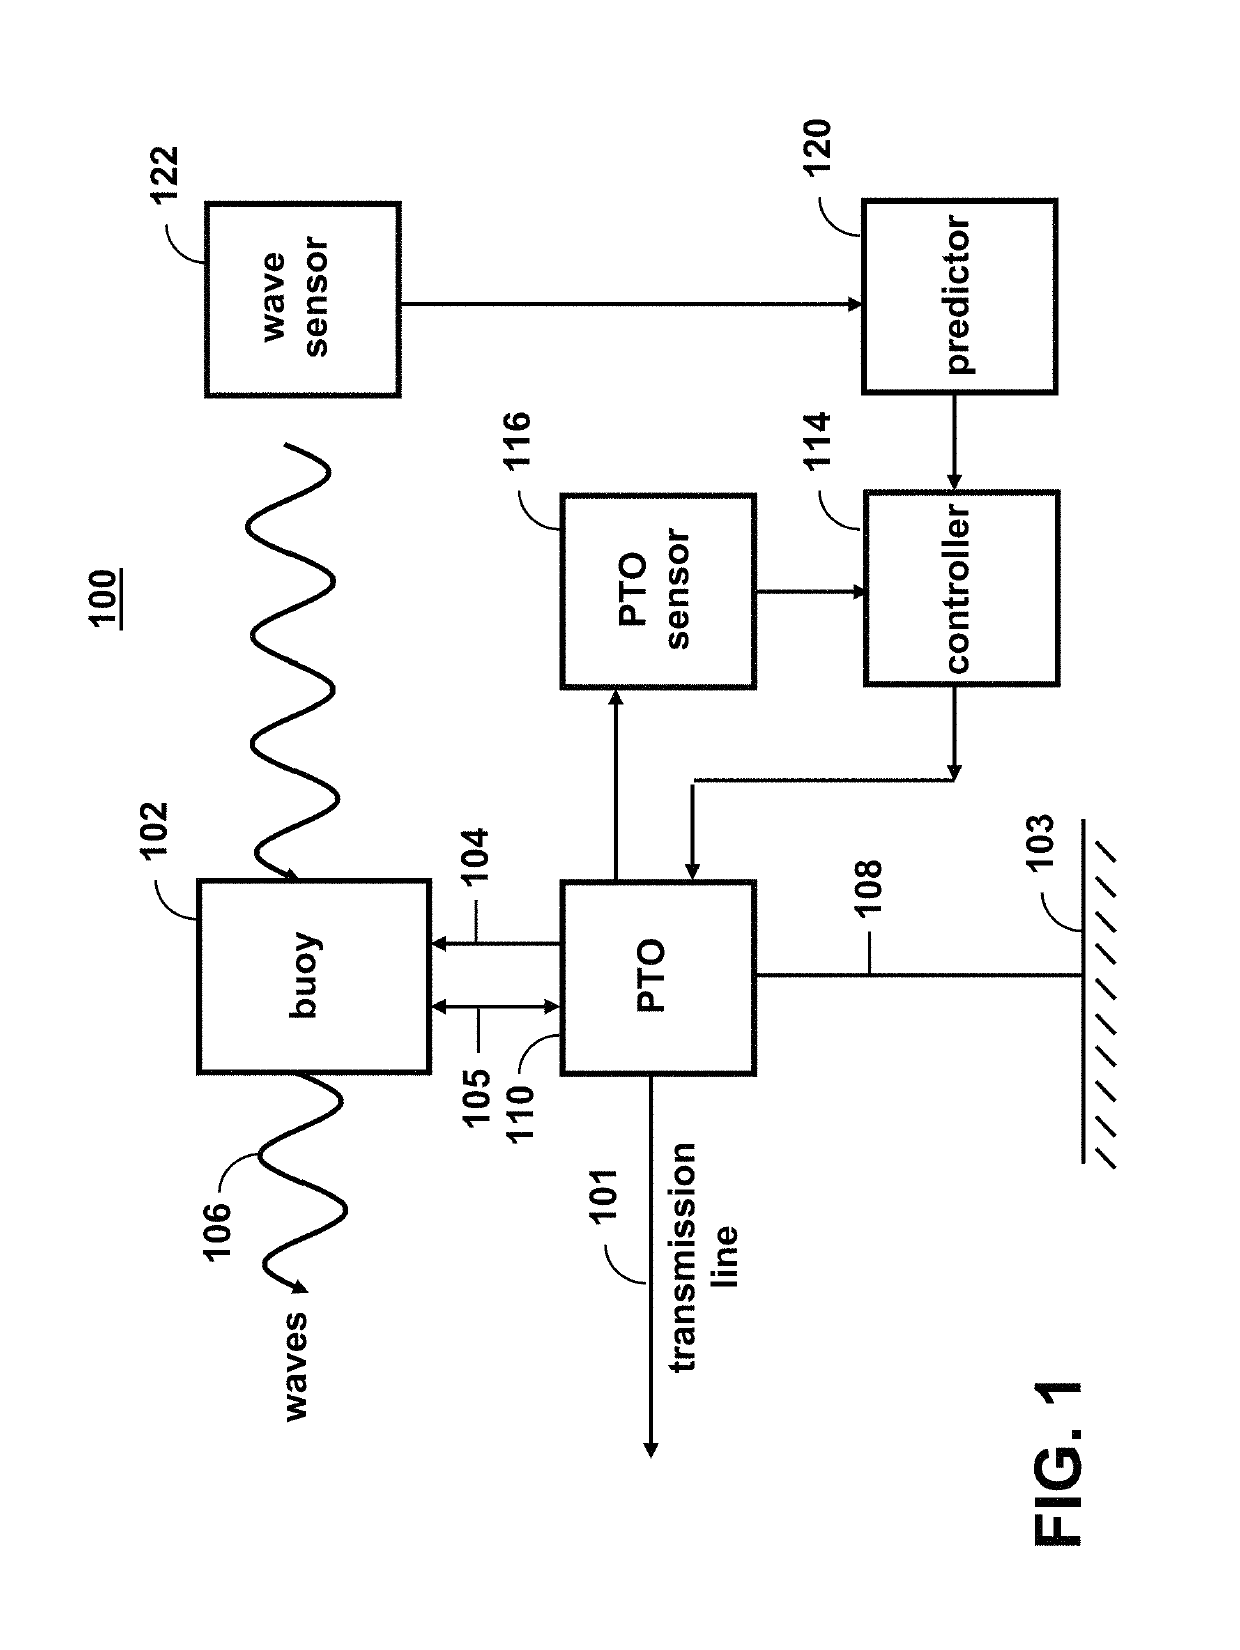 Pseudo-spectral method to control three-degree-of-freedom wave energy converters